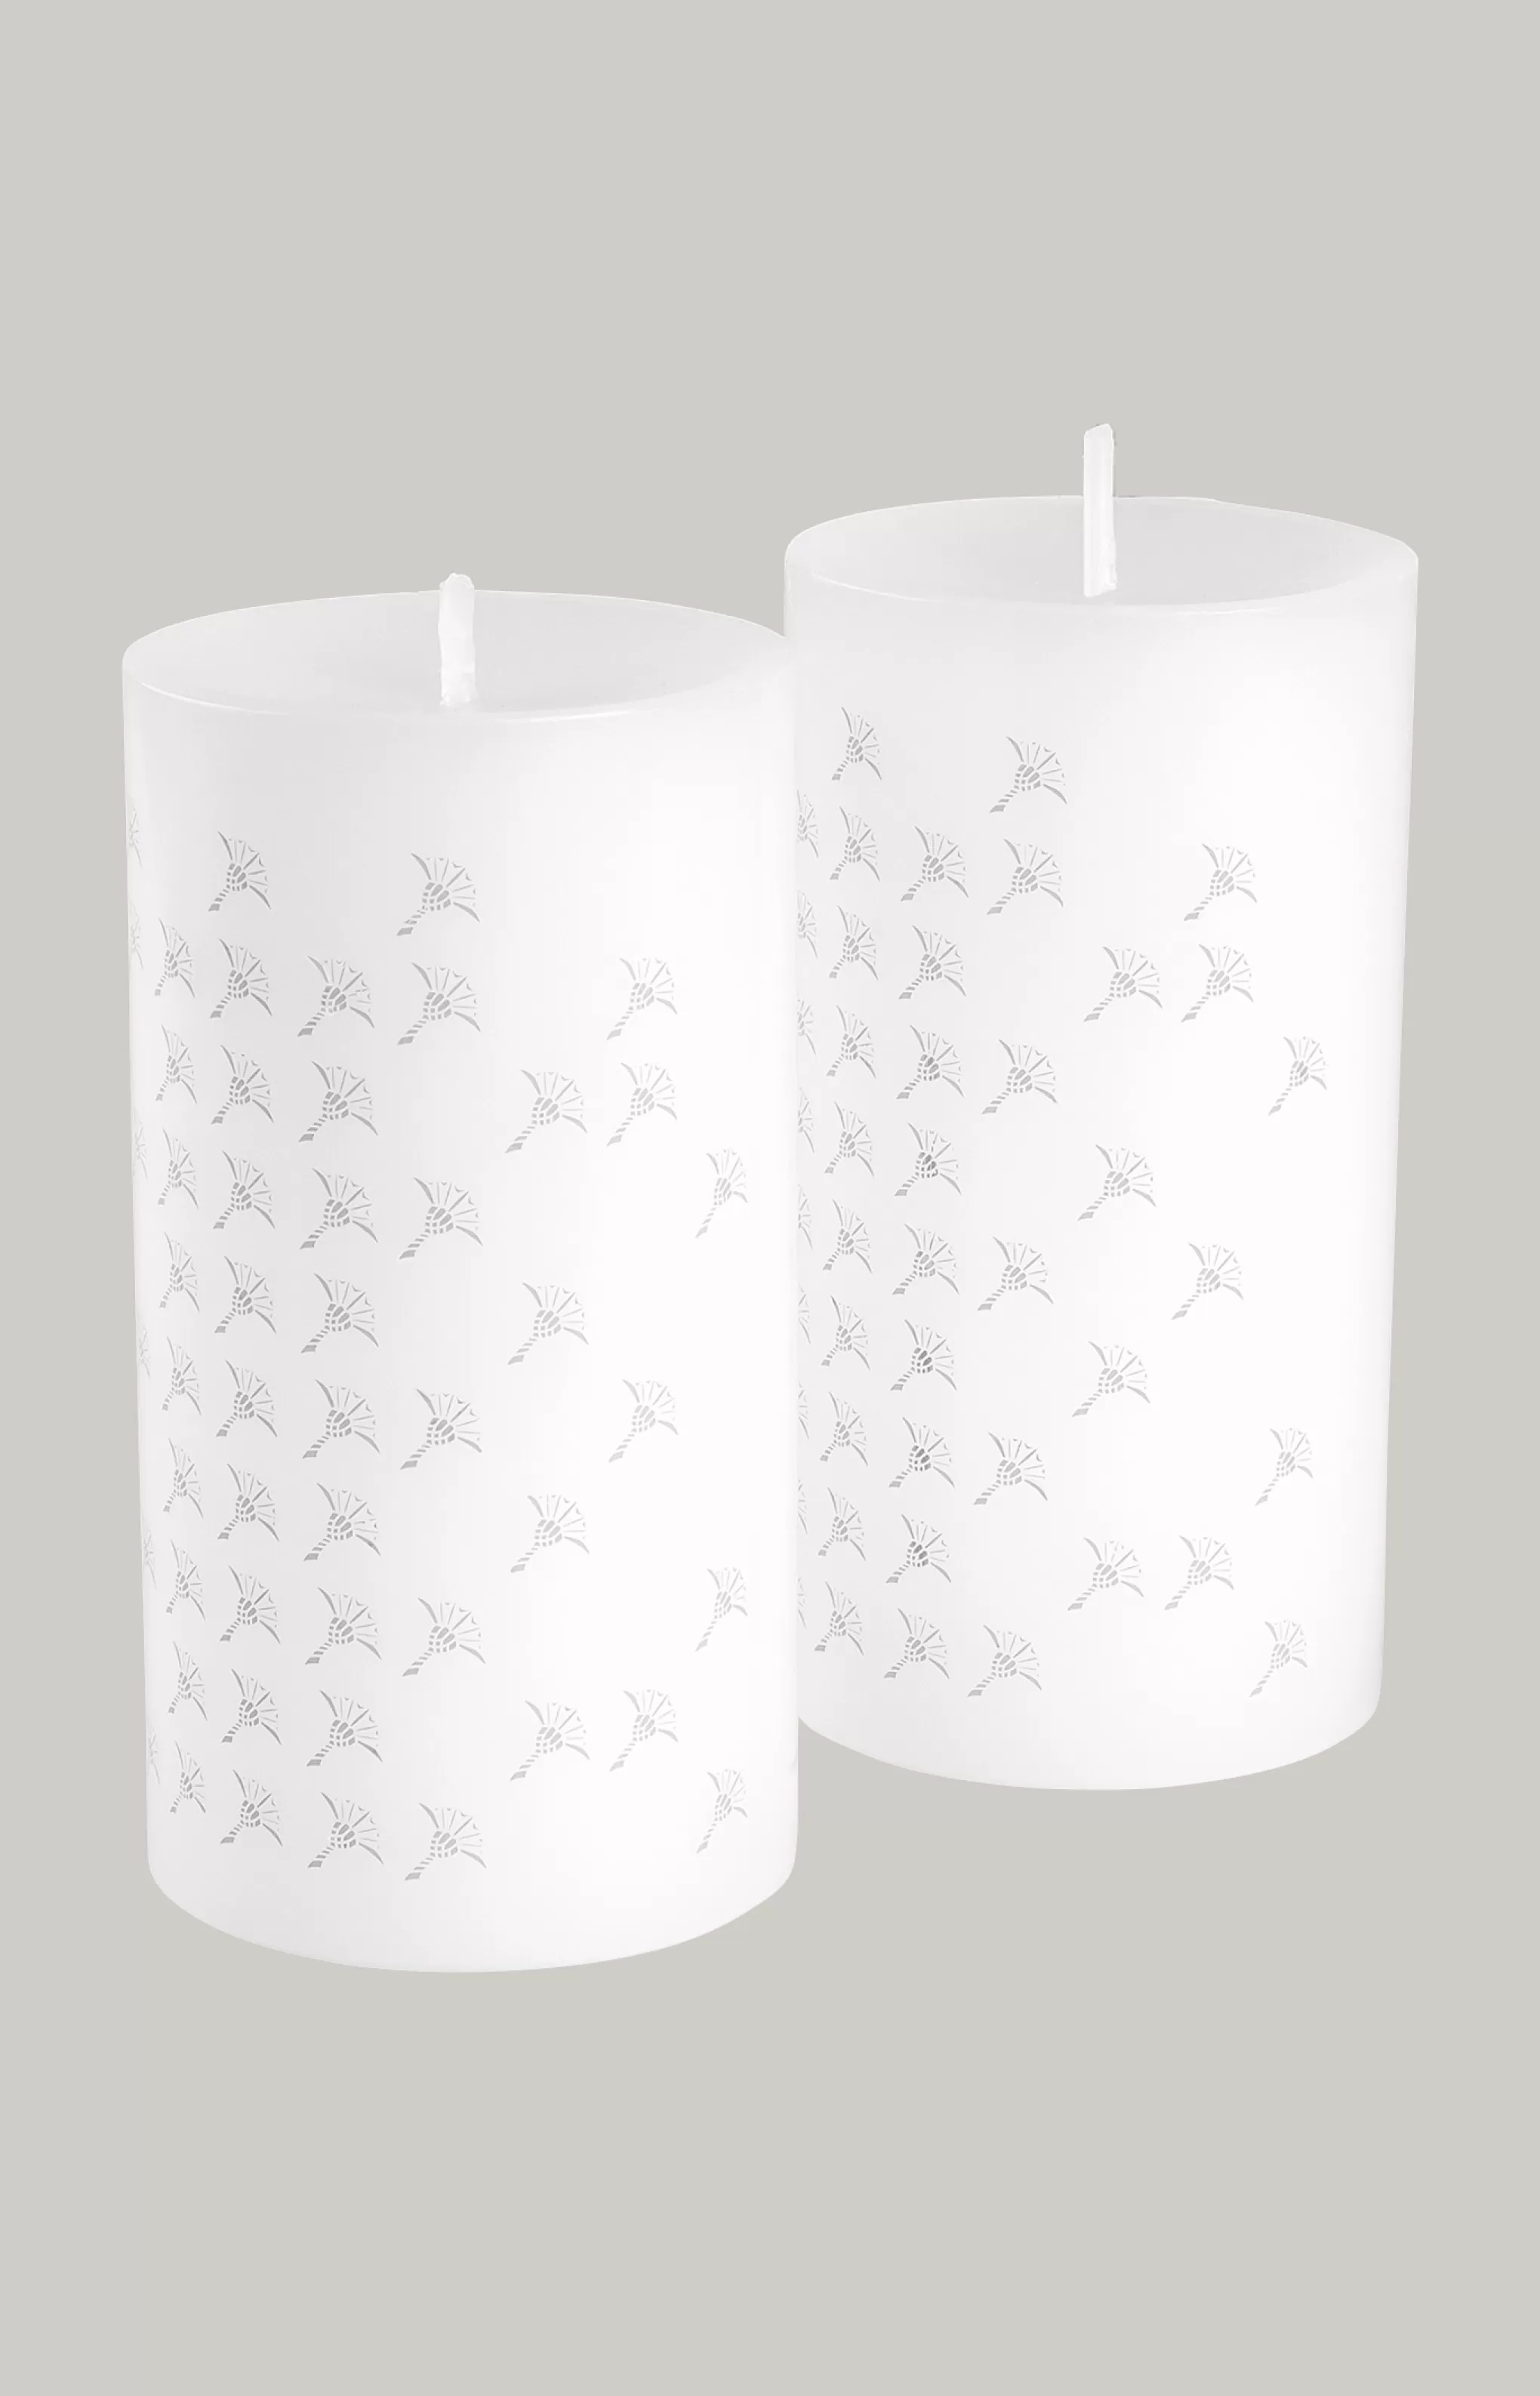 Home Accessories | Discover Everything | Candles & Candleholders | Table Accessories*JOOP Home Accessories | Discover Everything | Candles & Candleholders | Table Accessories ! FADED CORNFLOWER Pillar Candles in - Set of 2, 15 cm tall